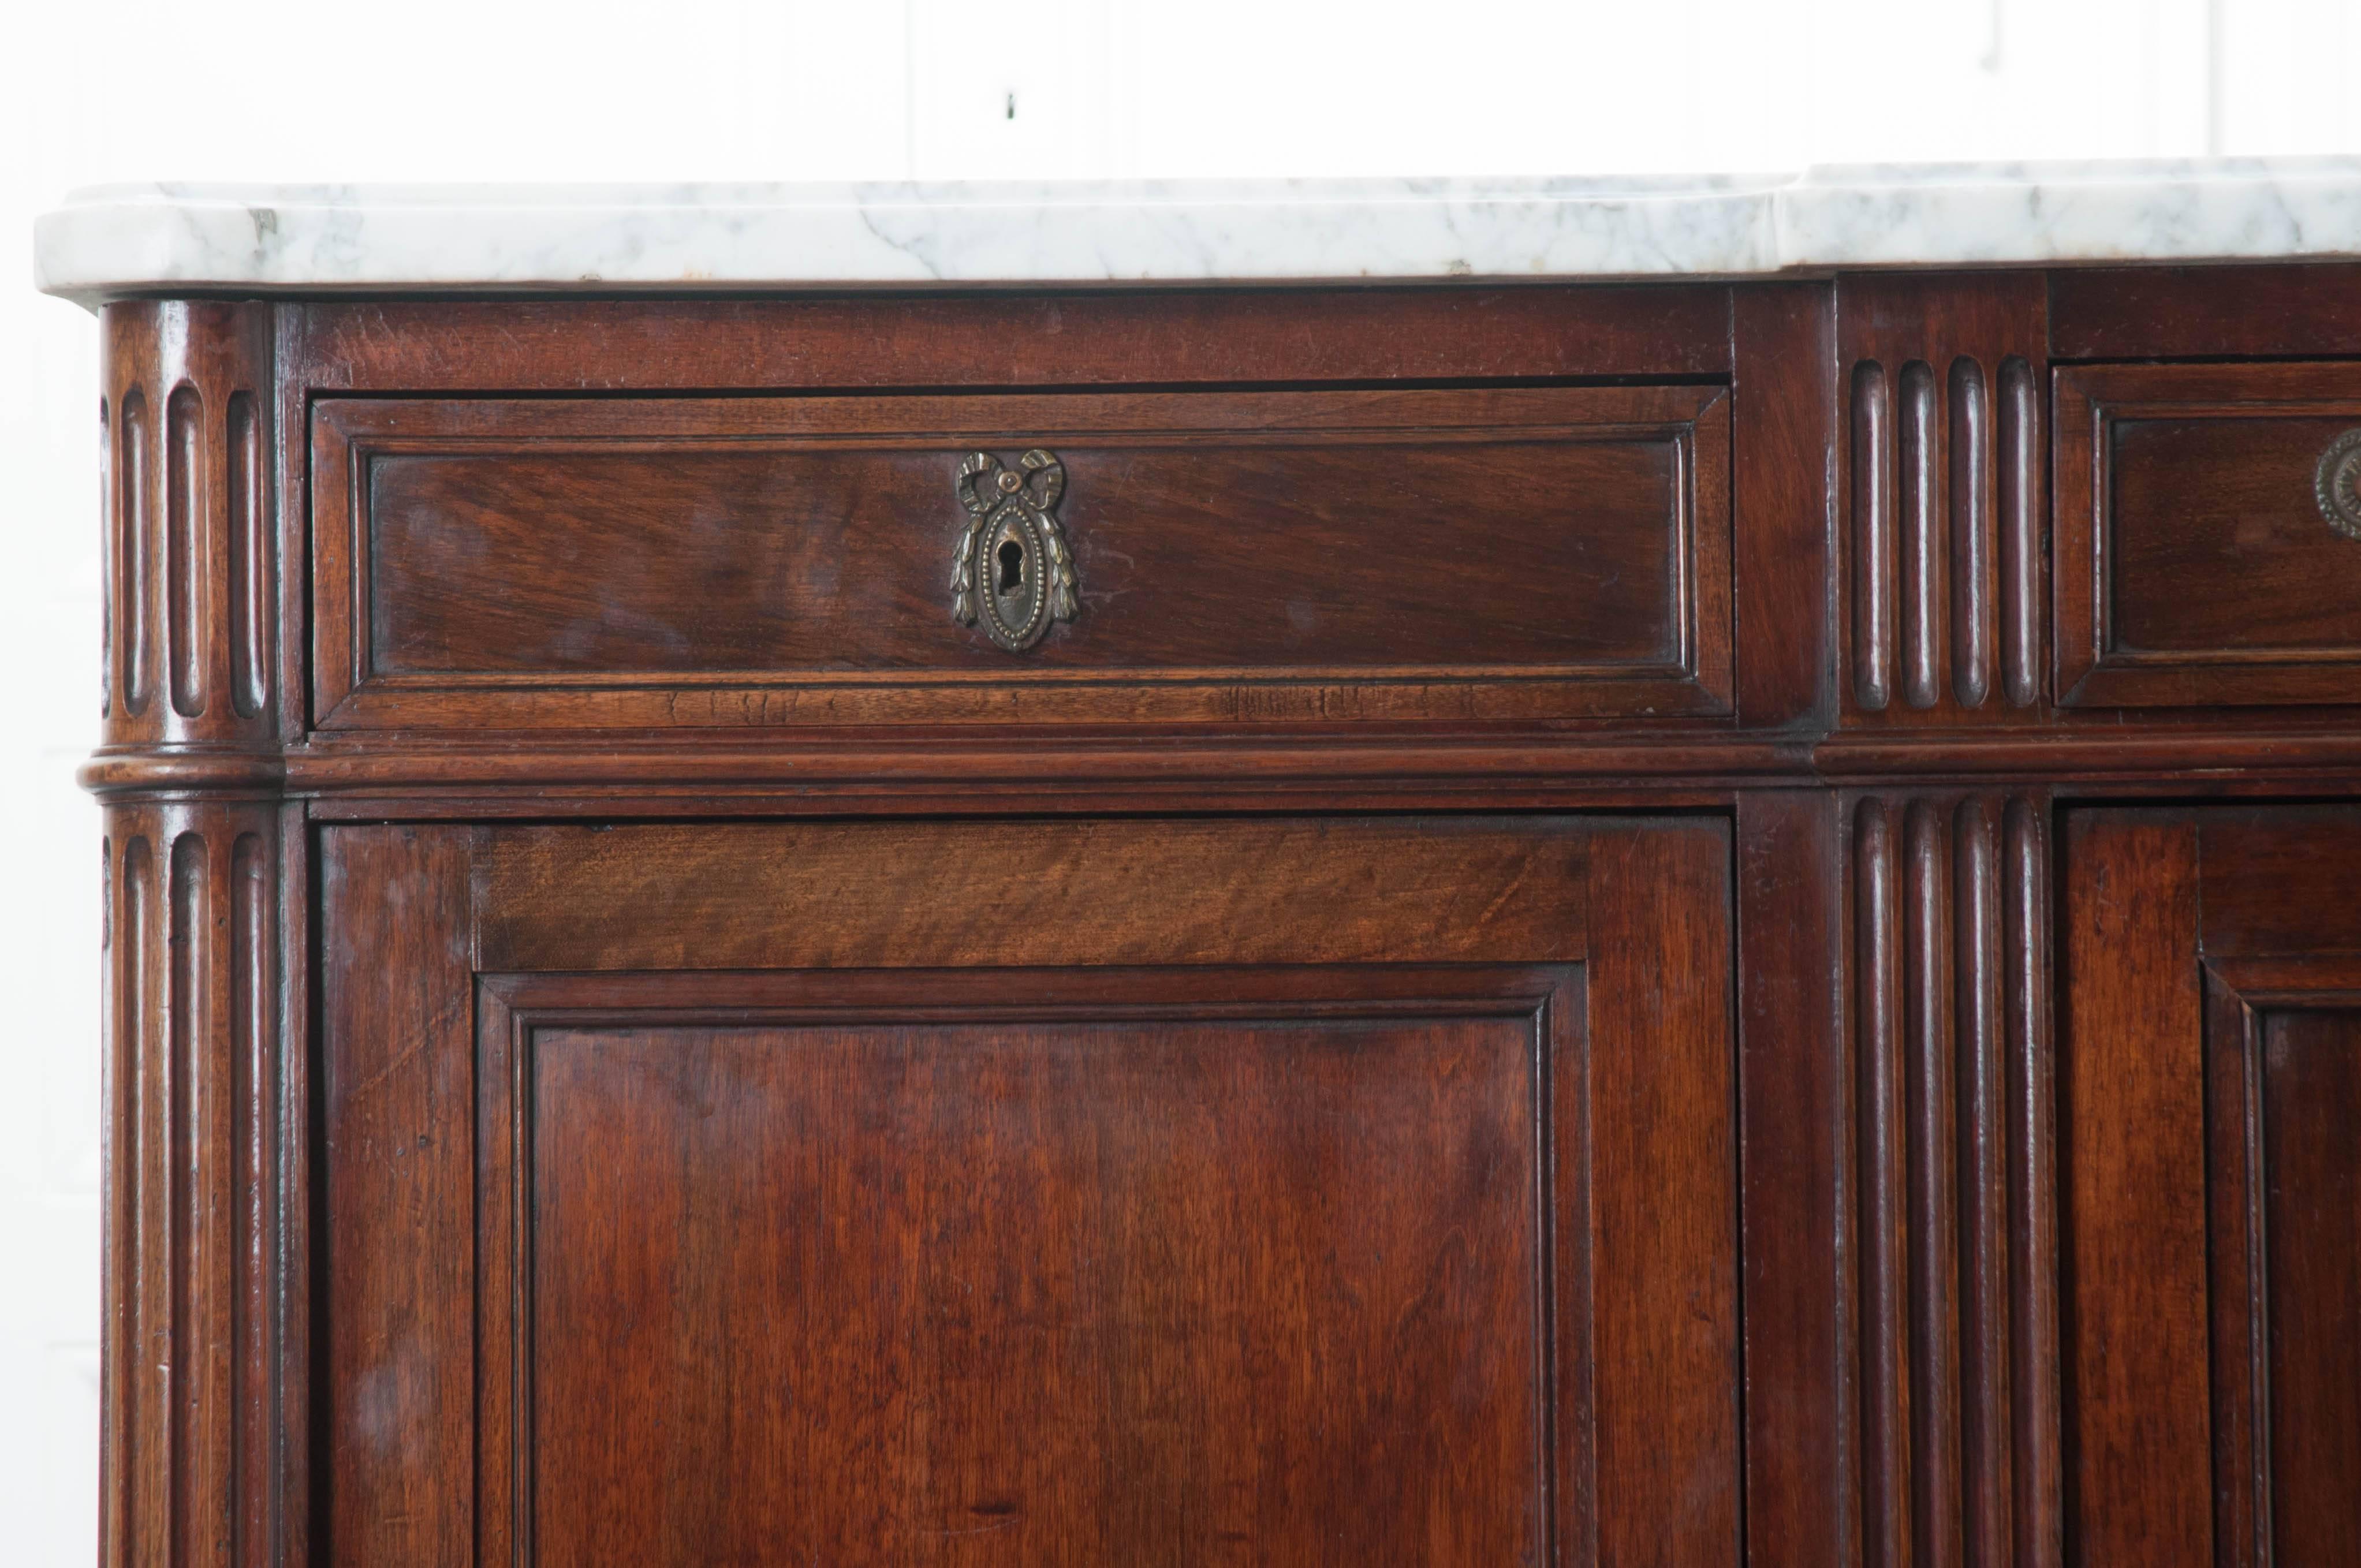 A handsome breakfront mahogany, three door Louis XVI style enfilade from 19th century, France. The antique piece is topped with its original shaped white marble. This marble top is in wonderful antique condition and is shaped to fit this enfilade.